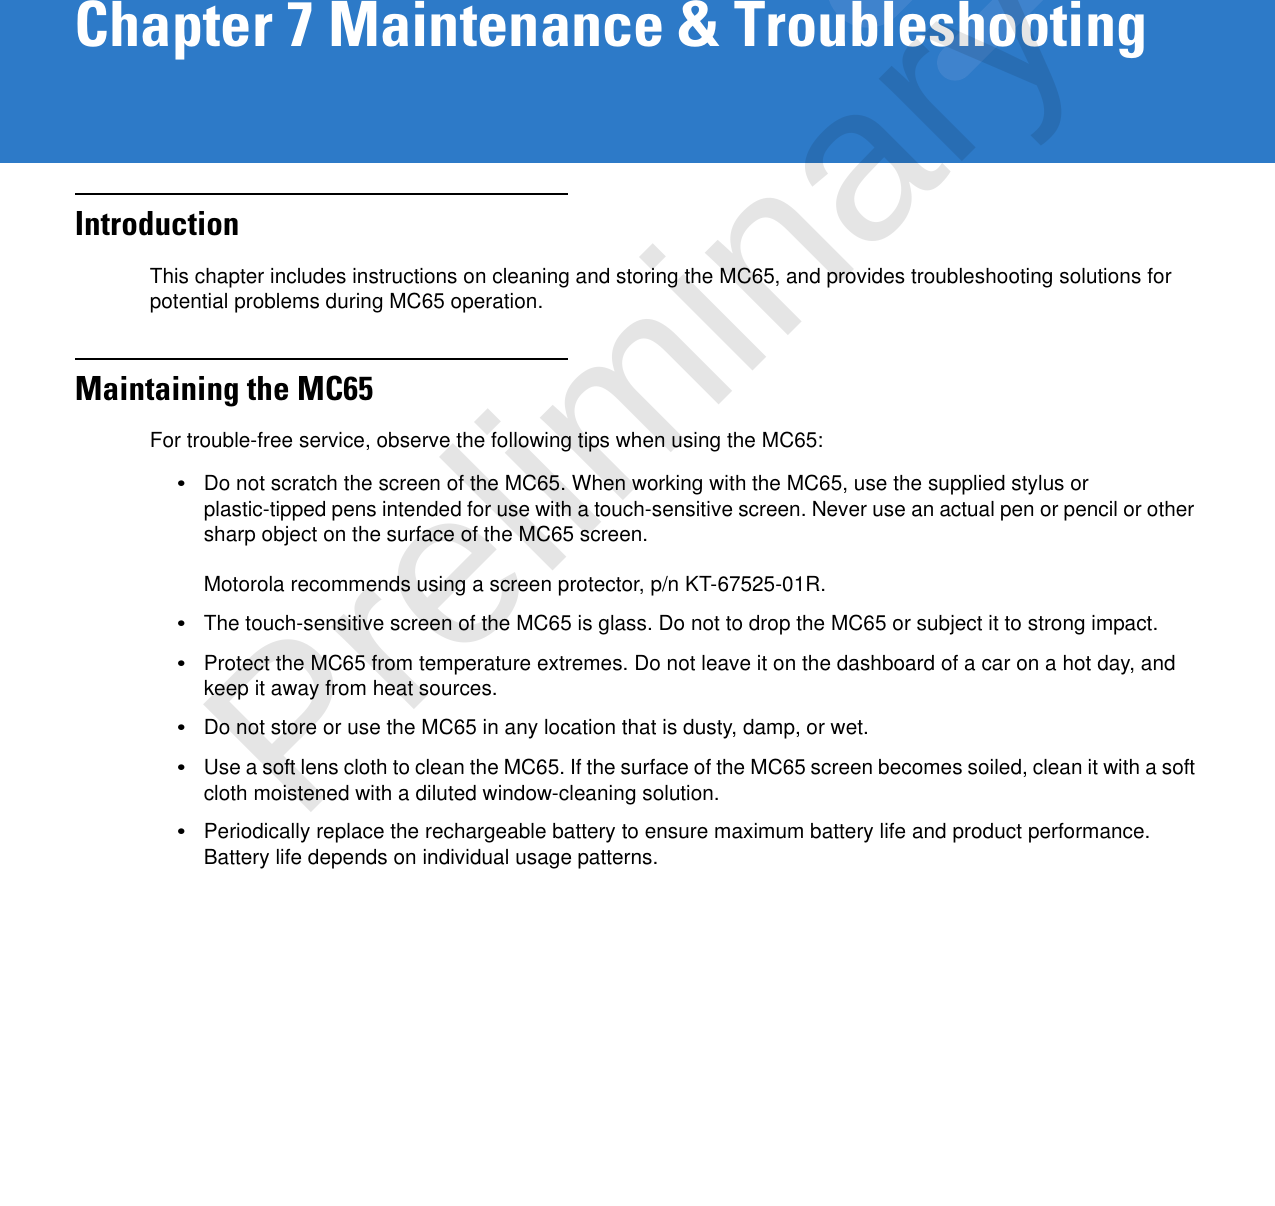 Chapter 7 Maintenance &amp; TroubleshootingIntroductionThis chapter includes instructions on cleaning and storing the MC65, and provides troubleshooting solutions for potential problems during MC65 operation.Maintaining the MC65For trouble-free service, observe the following tips when using the MC65:•Do not scratch the screen of the MC65. When working with the MC65, use the supplied stylus or plastic-tipped pens intended for use with a touch-sensitive screen. Never use an actual pen or pencil or other sharp object on the surface of the MC65 screen. Motorola recommends using a screen protector, p/n KT-67525-01R.•The touch-sensitive screen of the MC65 is glass. Do not to drop the MC65 or subject it to strong impact.•Protect the MC65 from temperature extremes. Do not leave it on the dashboard of a car on a hot day, and keep it away from heat sources.•Do not store or use the MC65 in any location that is dusty, damp, or wet.•Use a soft lens cloth to clean the MC65. If the surface of the MC65 screen becomes soiled, clean it with a soft cloth moistened with a diluted window-cleaning solution.•Periodically replace the rechargeable battery to ensure maximum battery life and product performance. Battery life depends on individual usage patterns.Preliminary